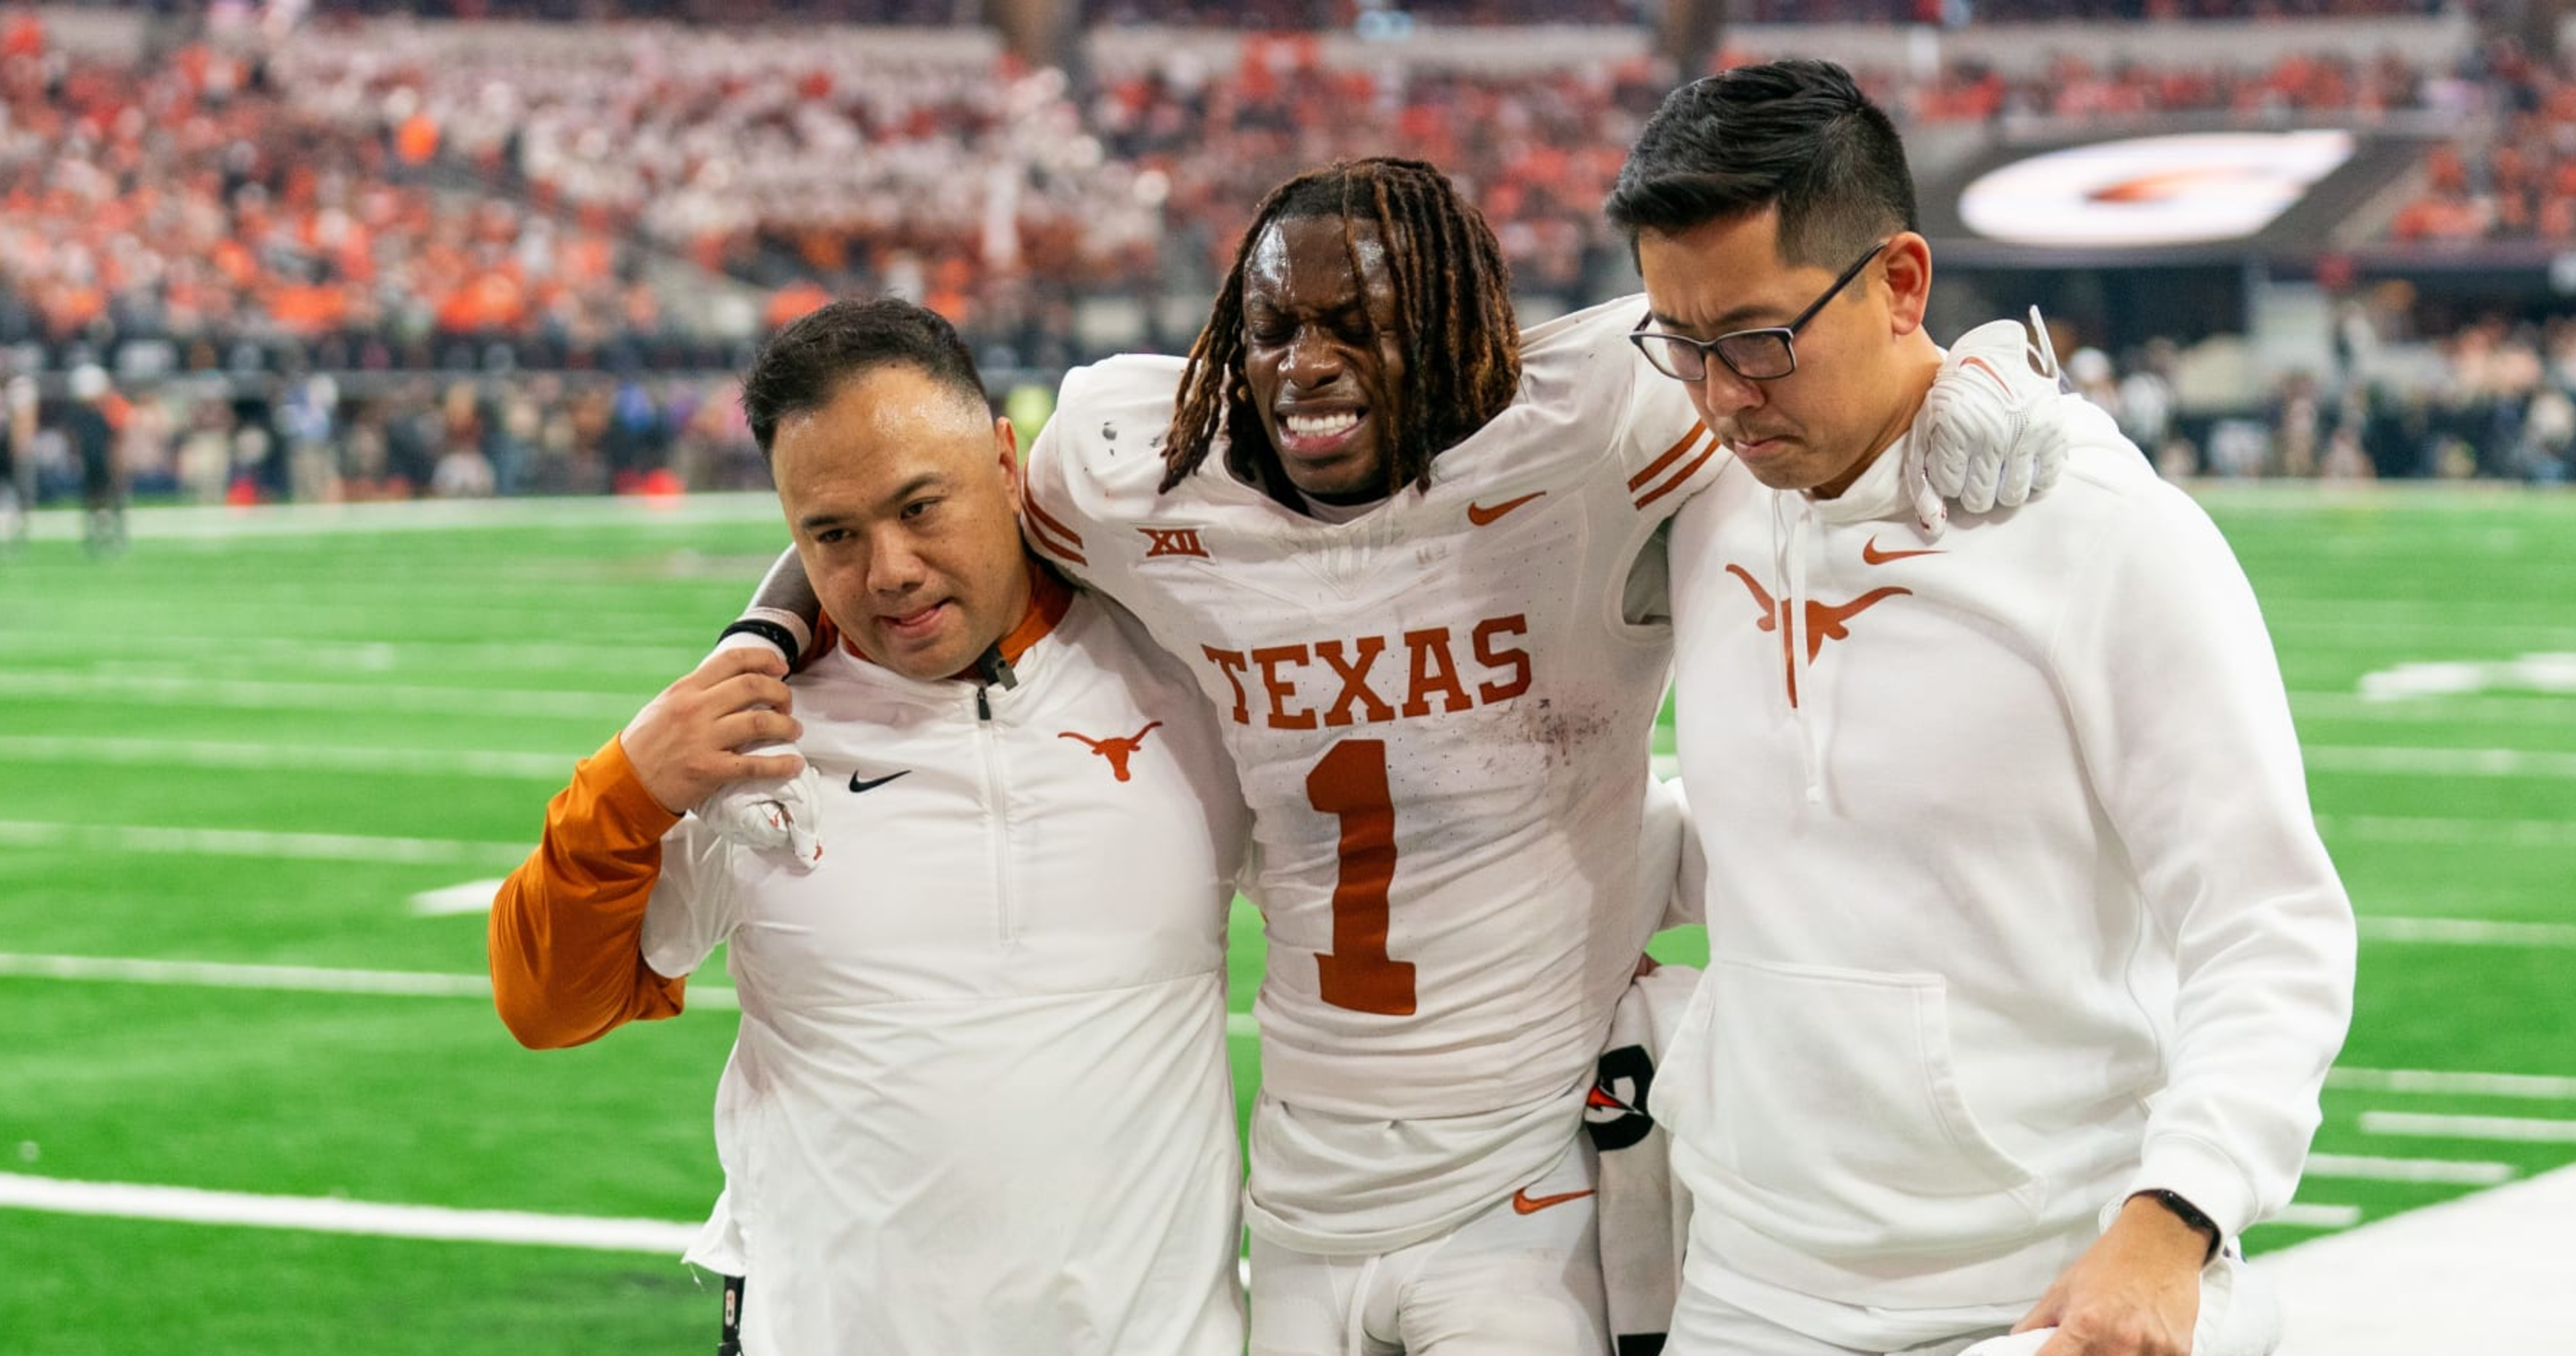 Texas' Xavier Worthy on Crutches After Suffering Leg Injury vs